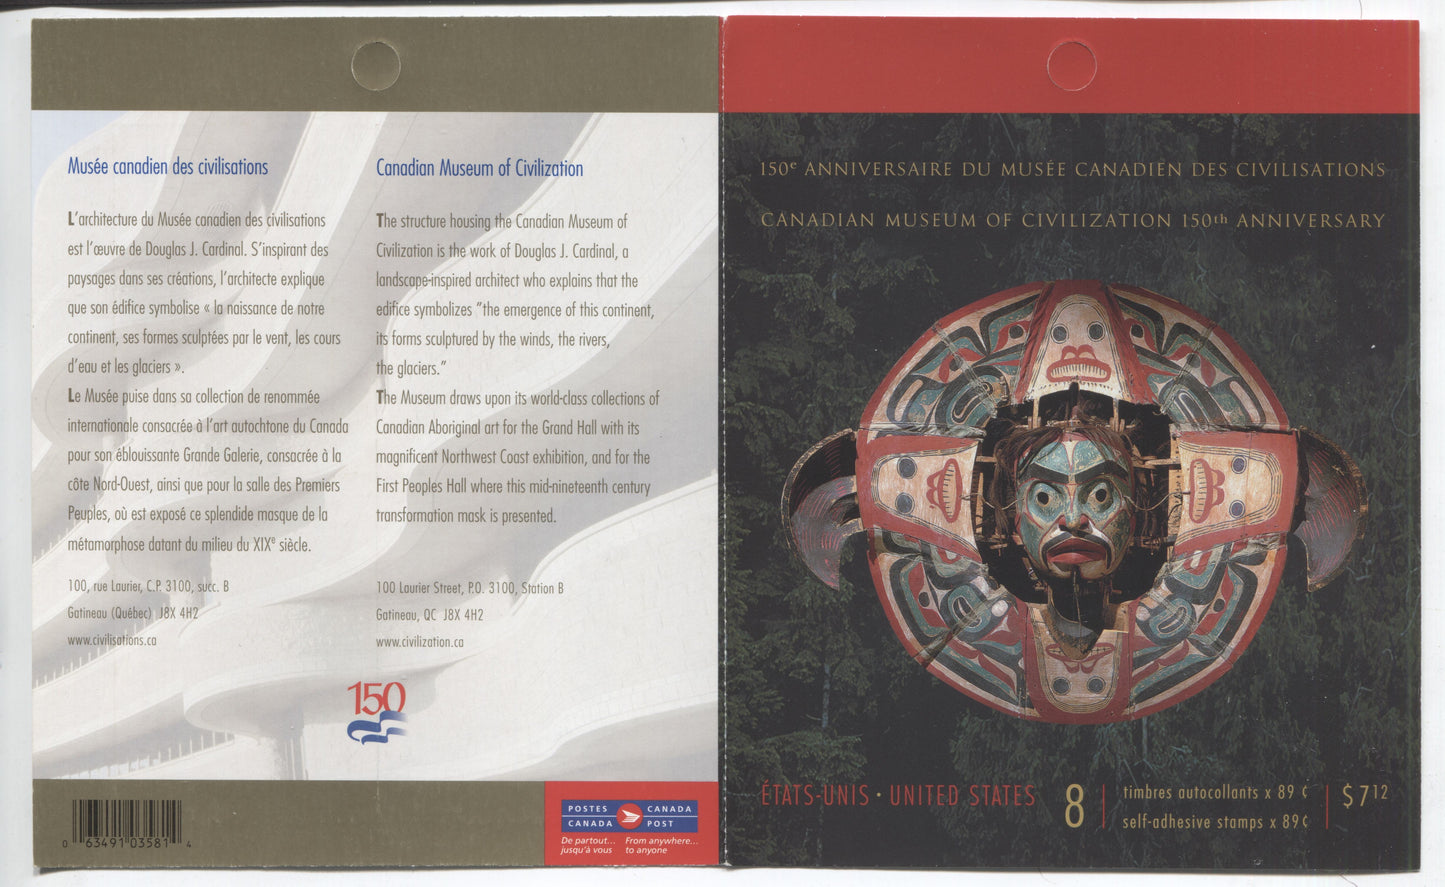 Canada #BK325 2006 Museum of Civilization Issue, Complete $7.12 Booklet, Tullis Russell Coatings Paper, Dead Paper, 4 mm GT-4 Tagging